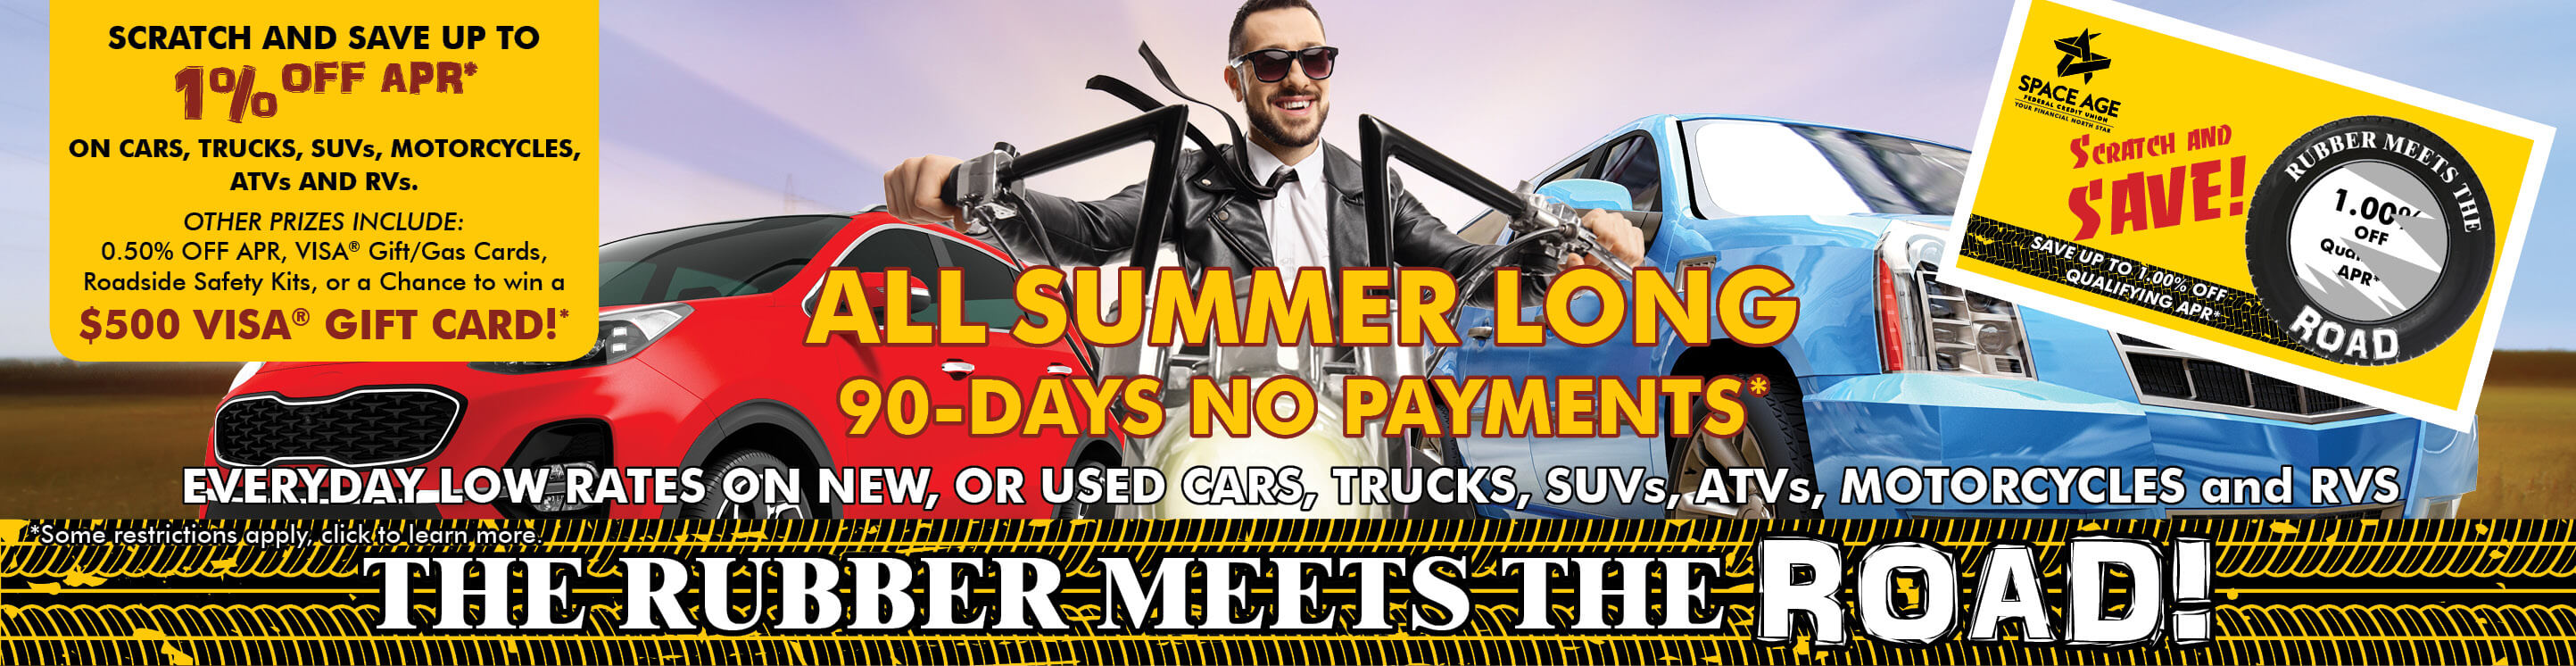 1%OFF APR* ON CARS, TRUCKS, SUVs, MOTORCYCLES, ATVs and RVs and Other prizes!